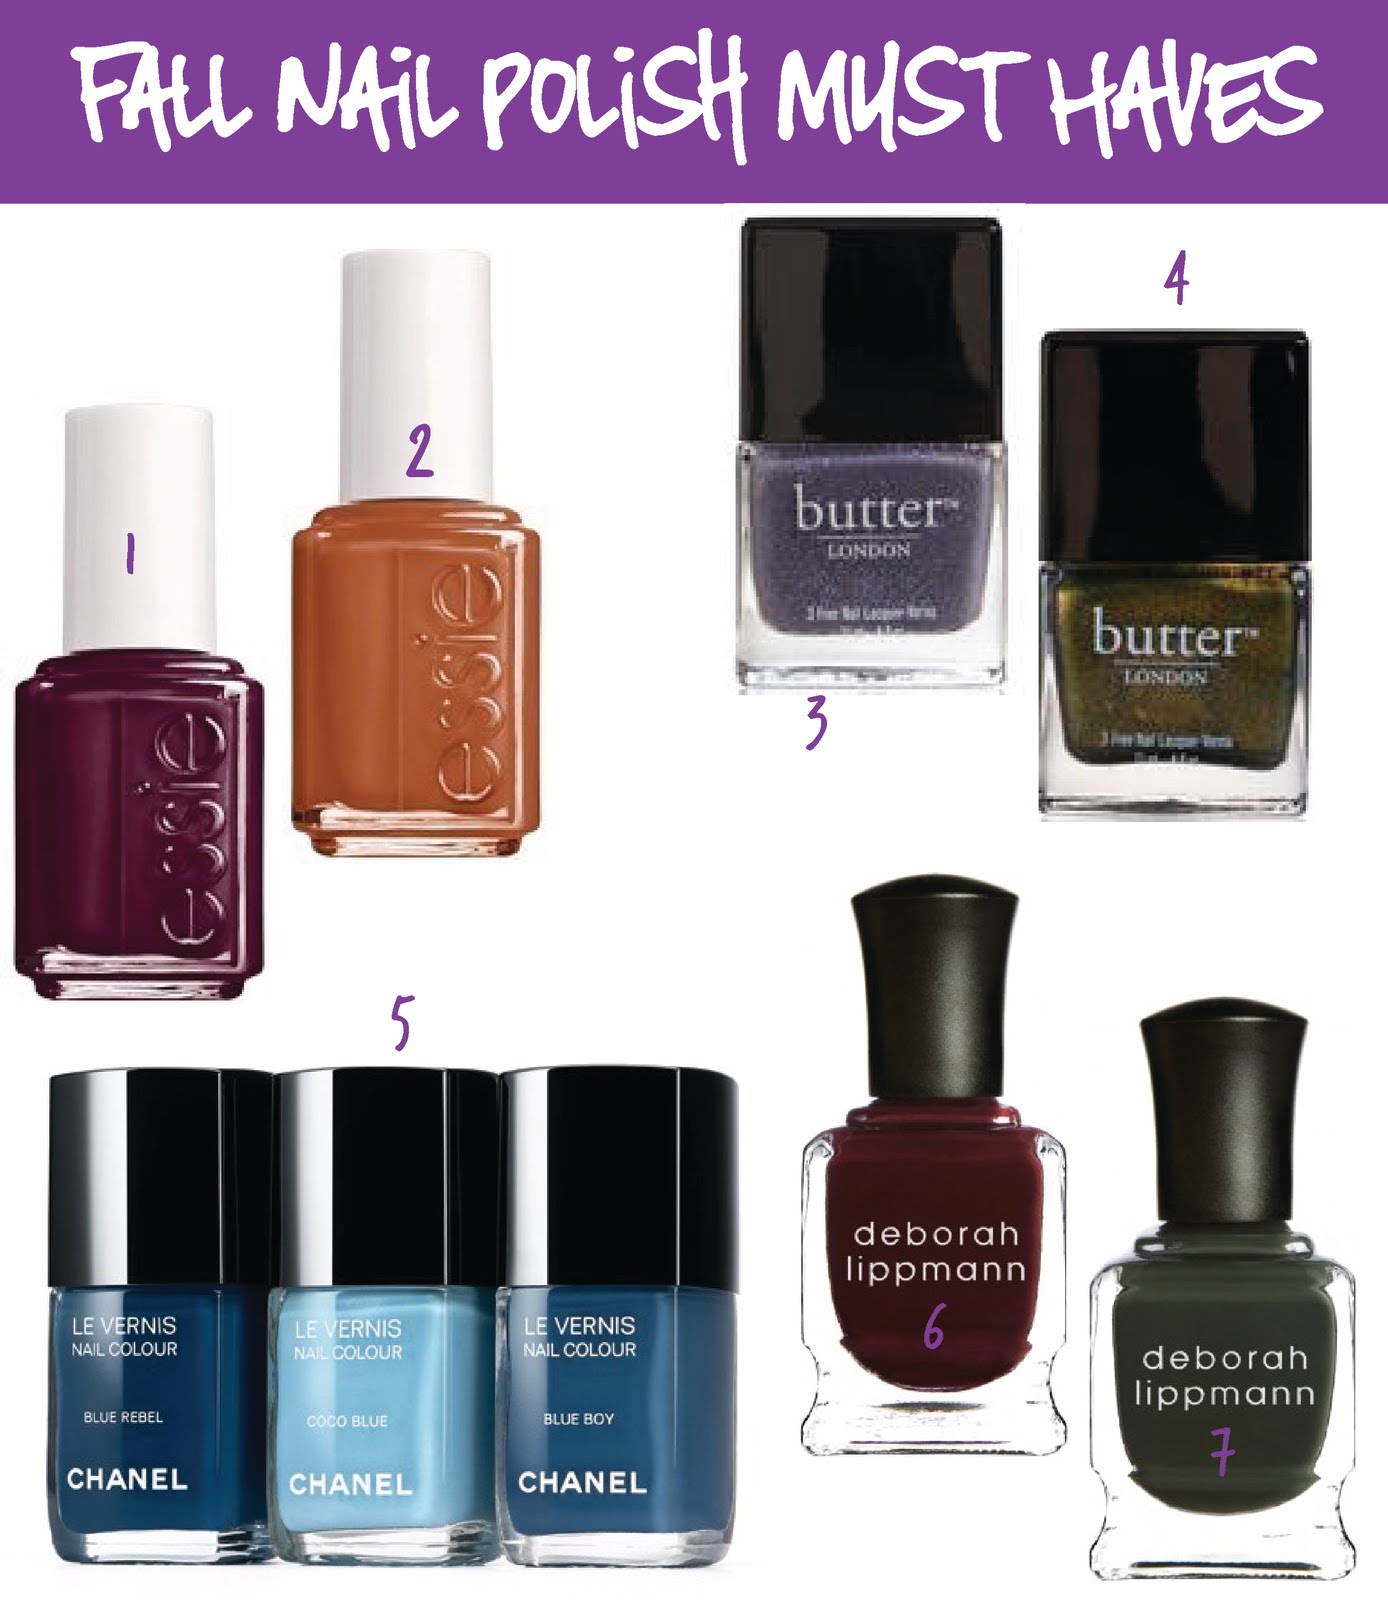 Stylish Fall 2011 Nail Polish Must Haves | Stylelista Confessions